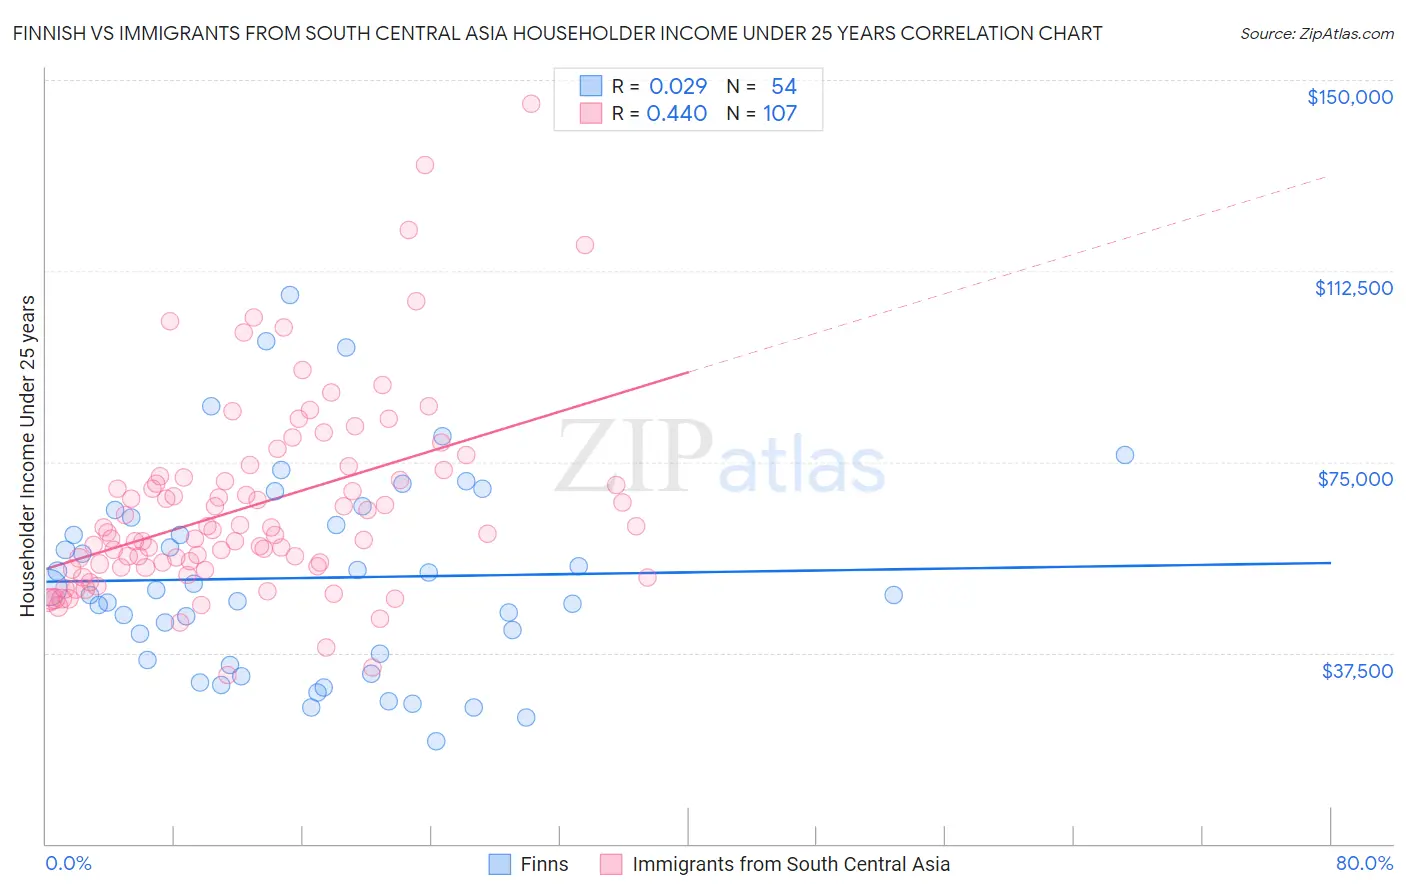 Finnish vs Immigrants from South Central Asia Householder Income Under 25 years